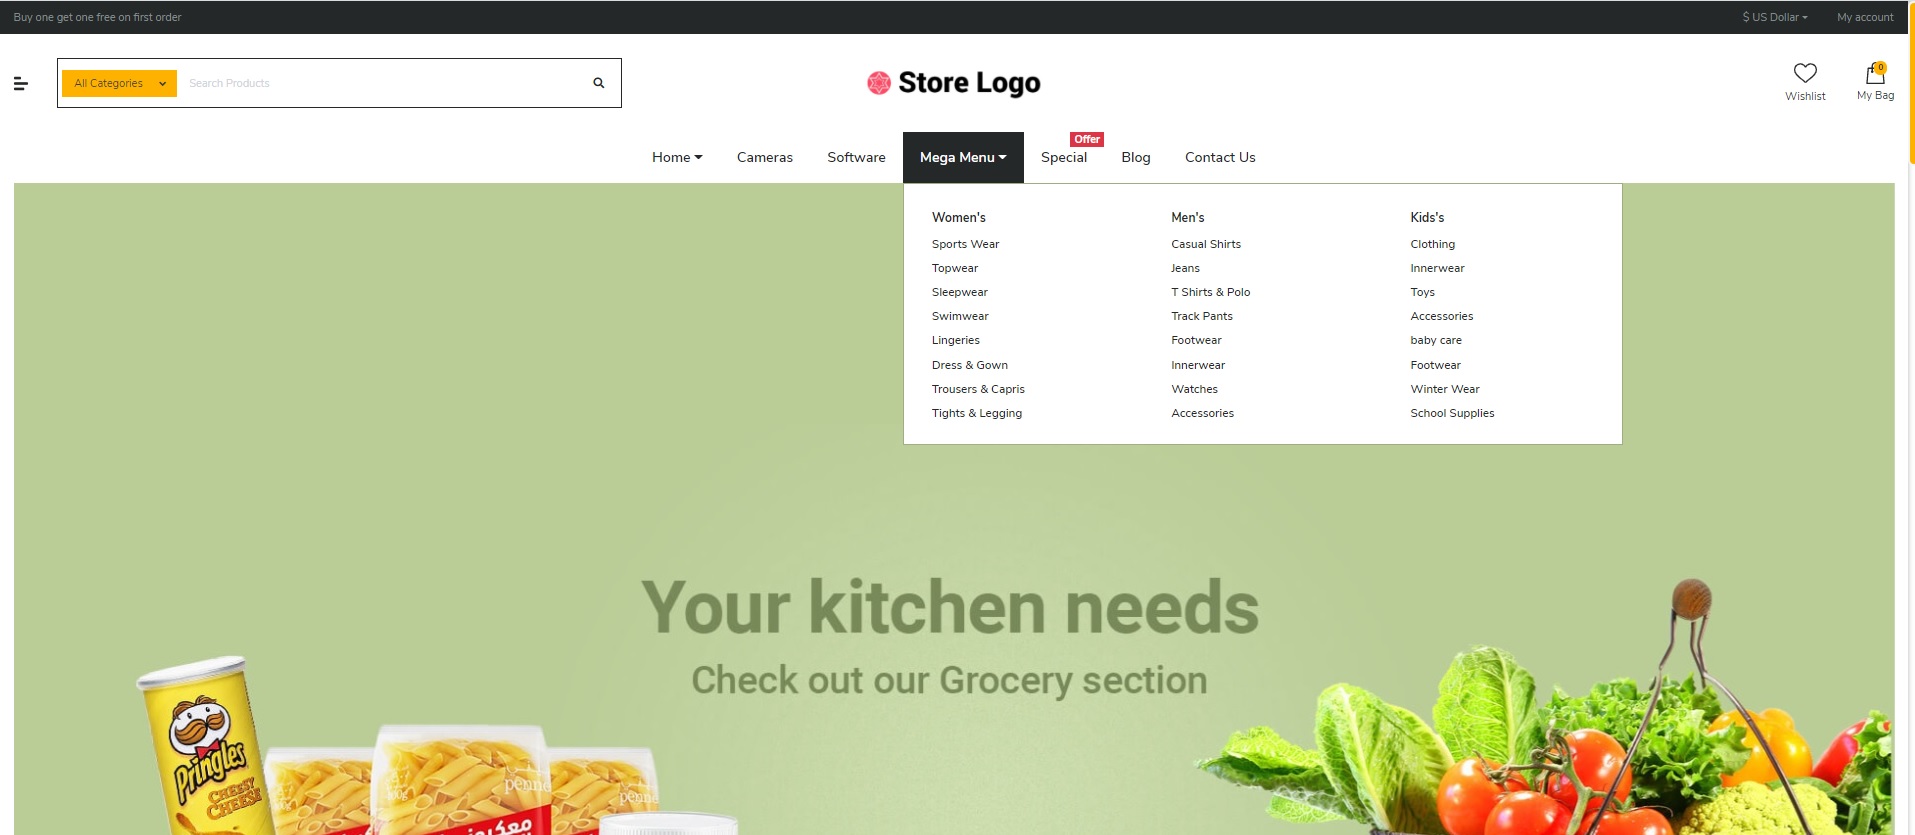 Shopica Grocery Advanced Opencart Theme